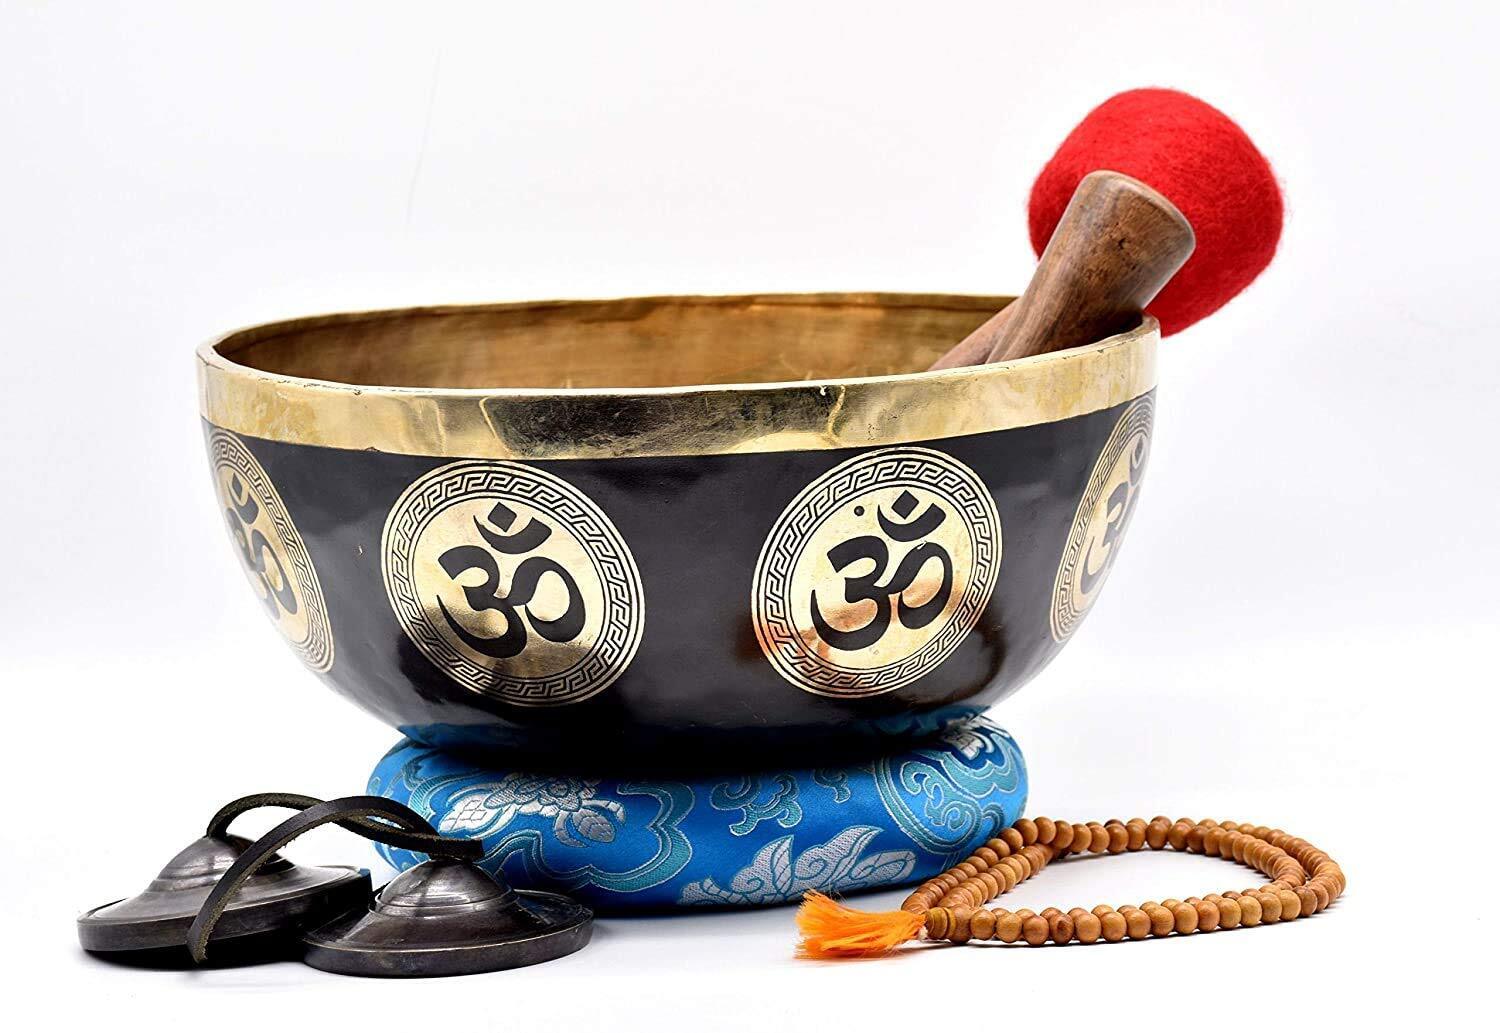 10 Inches Hindu Om ॐ Fine Carving Singing Bowl From Nepal-Meditation Bowlso...